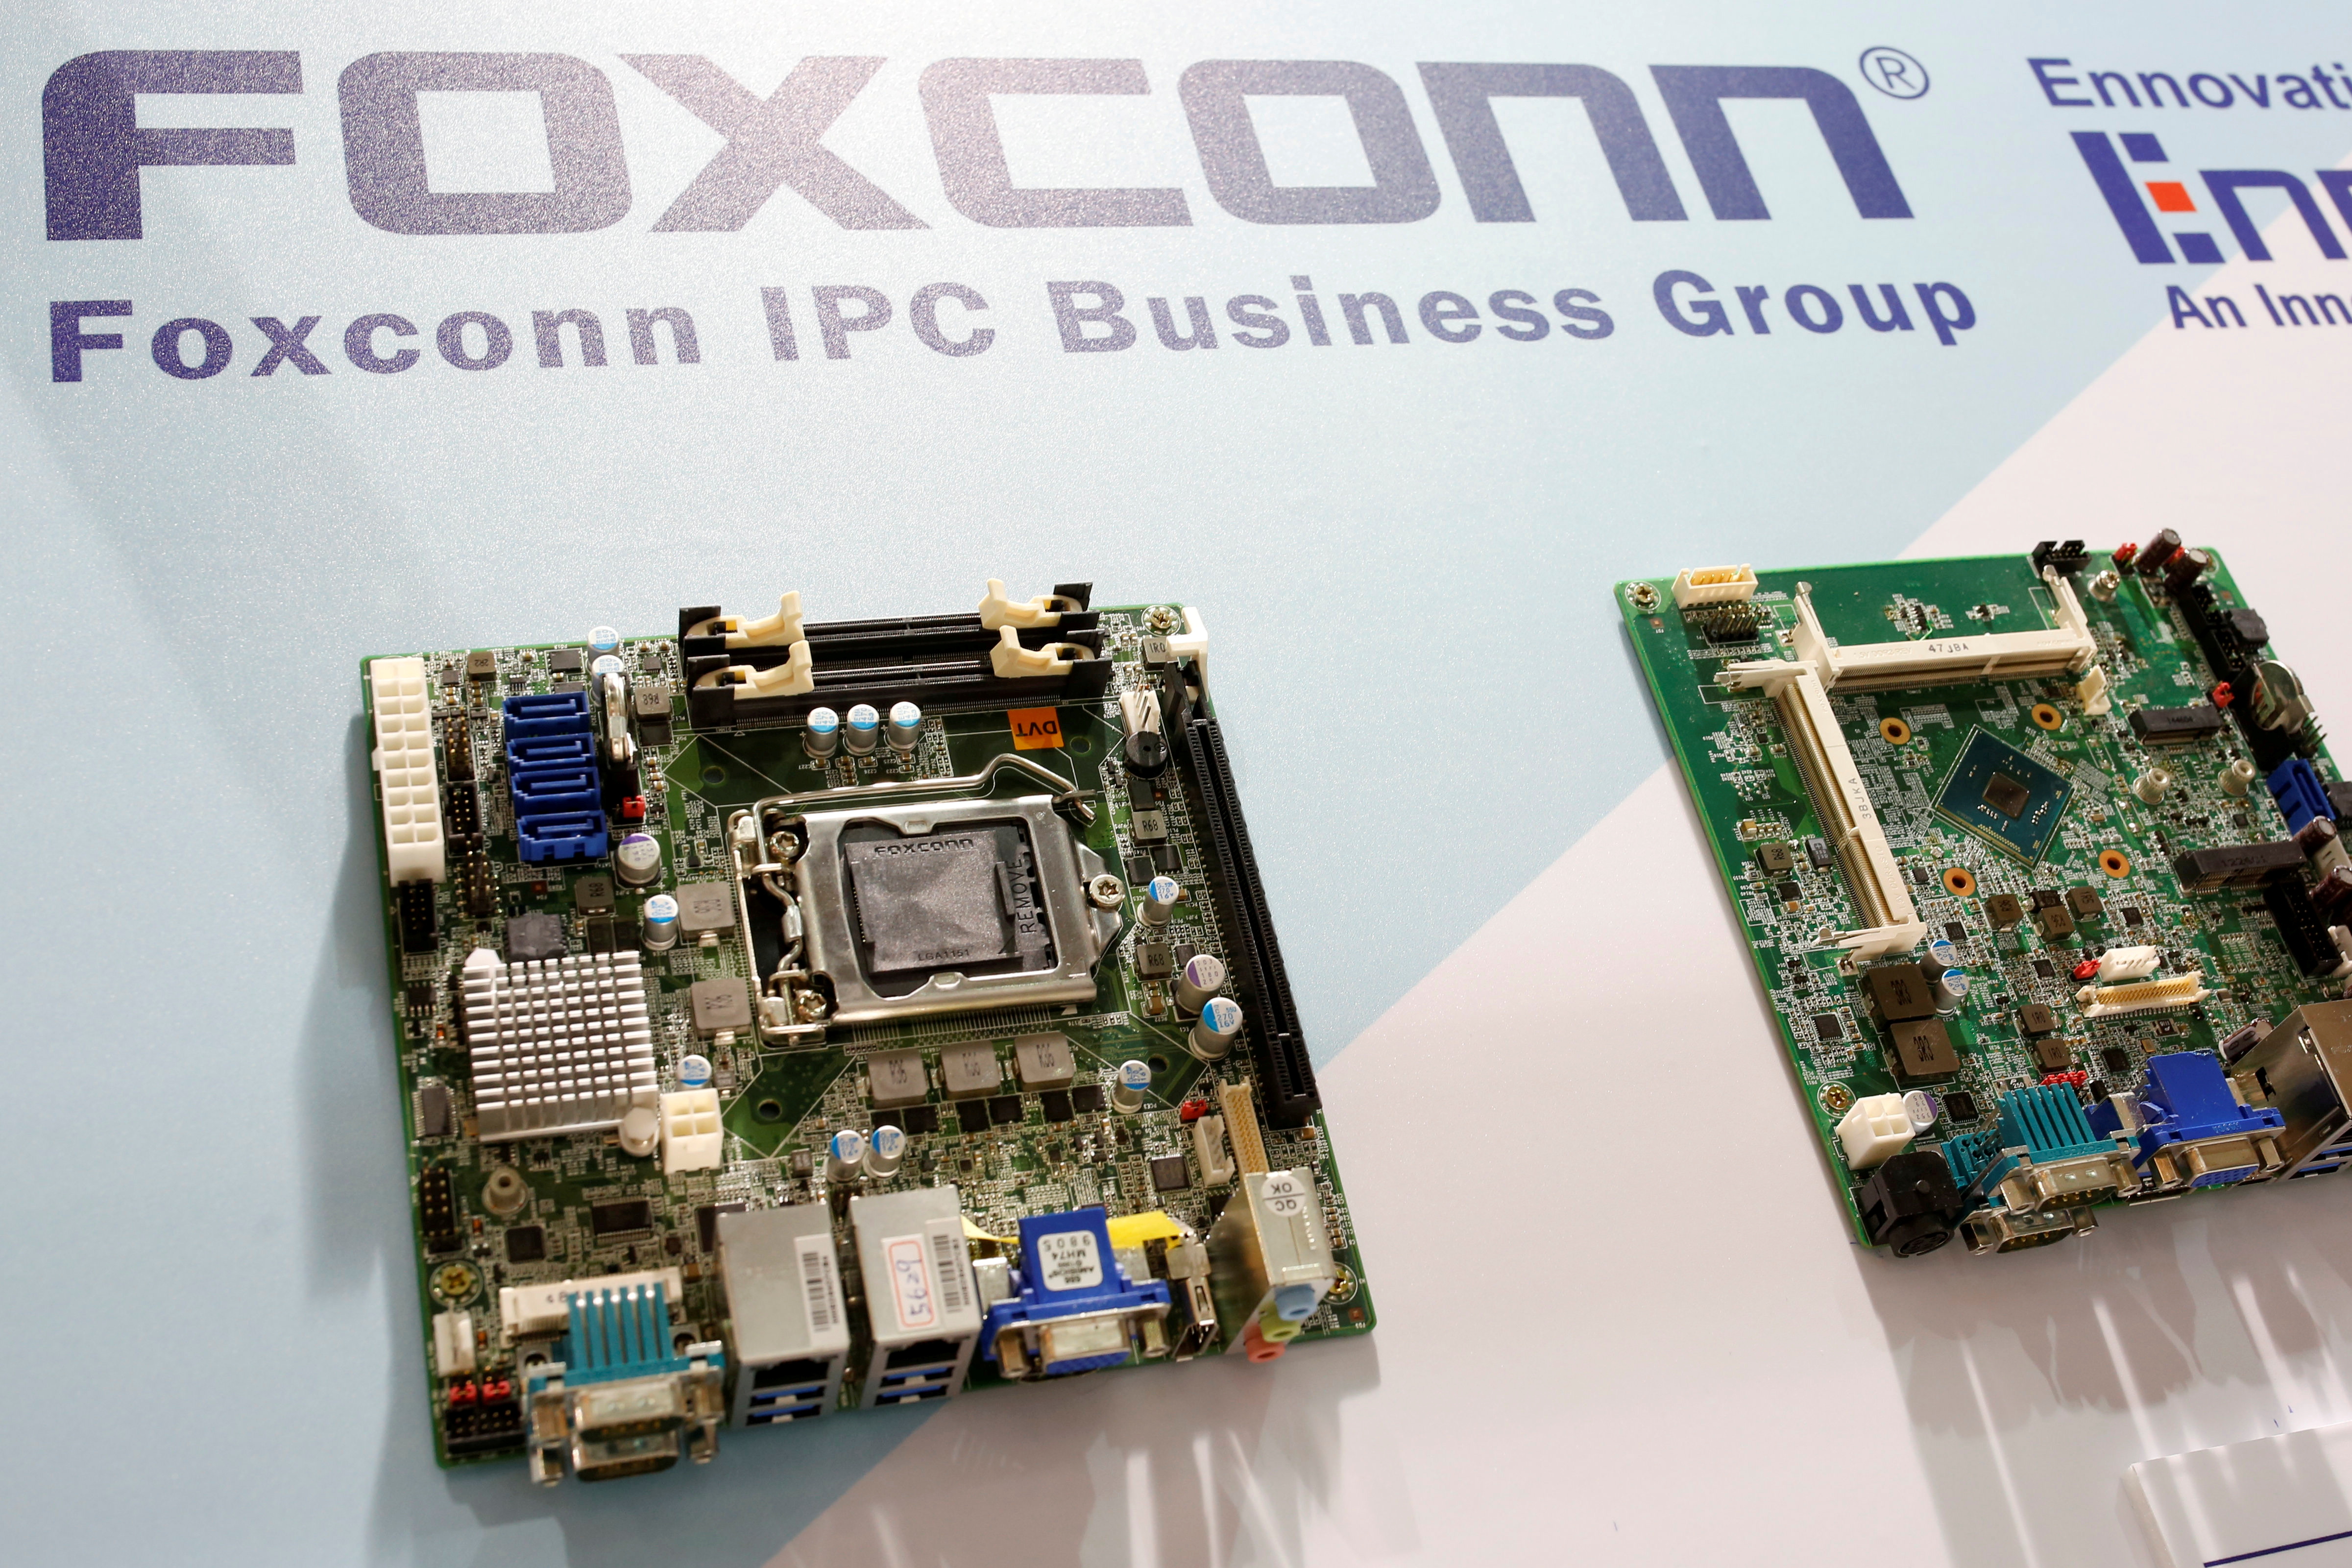 Foxconn's computer motherboards are seen during the annual Computex computer exhibition in Taipei, Taiwan June 1, 2016. REUTERS/Tyrone Siu/File Photo